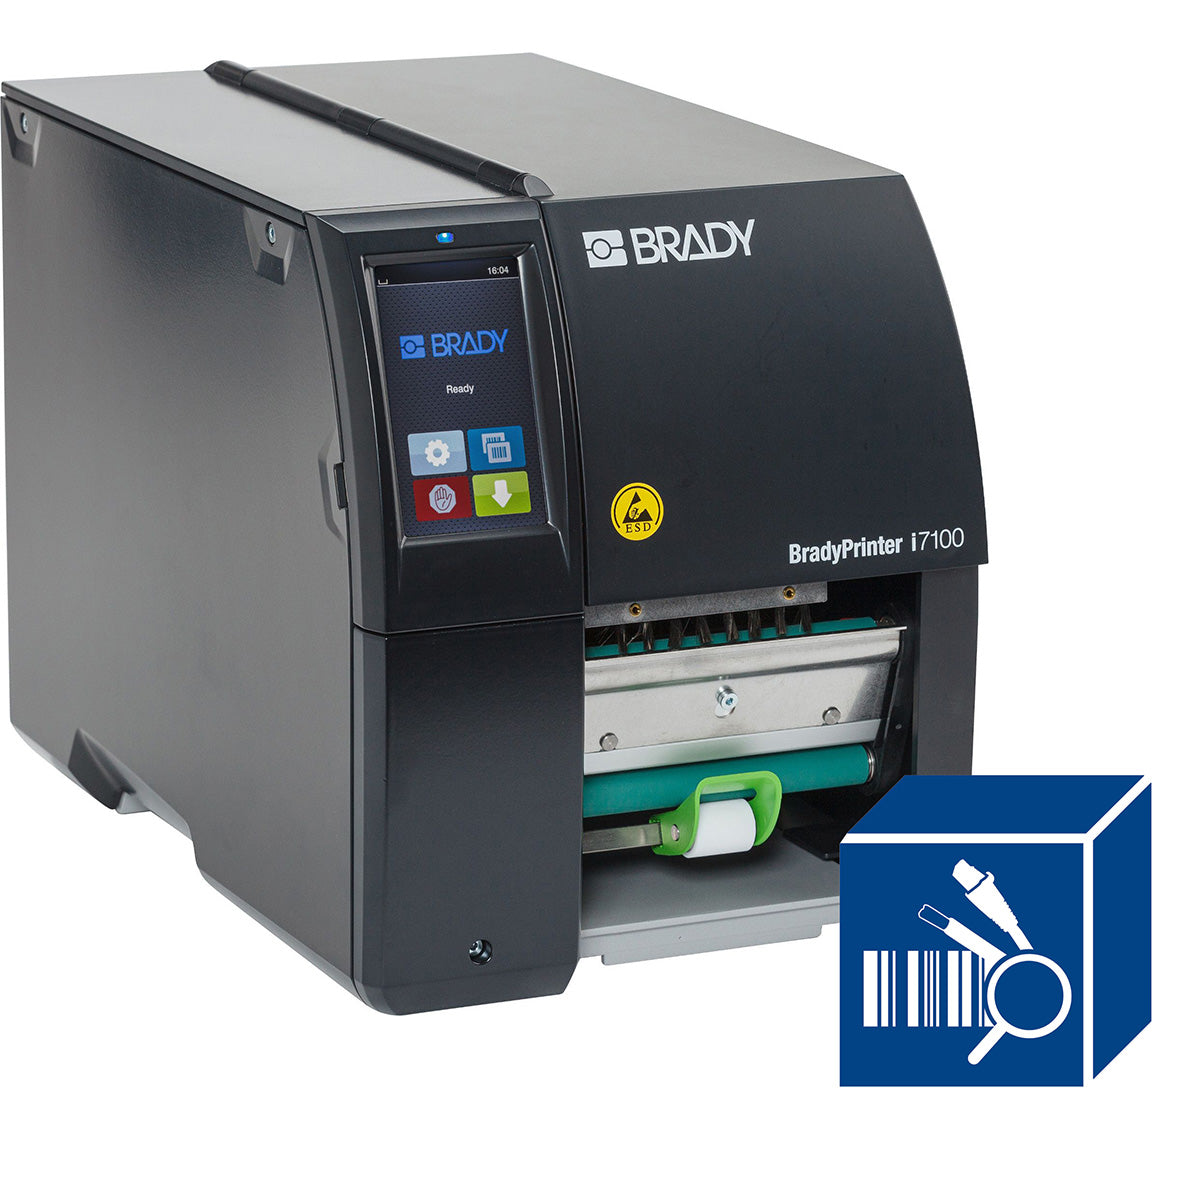 BradyPrinter i7100 300 dpi Industrial Label Printer ESD-Protected Peel Model with Product and Wire ID Software Suite